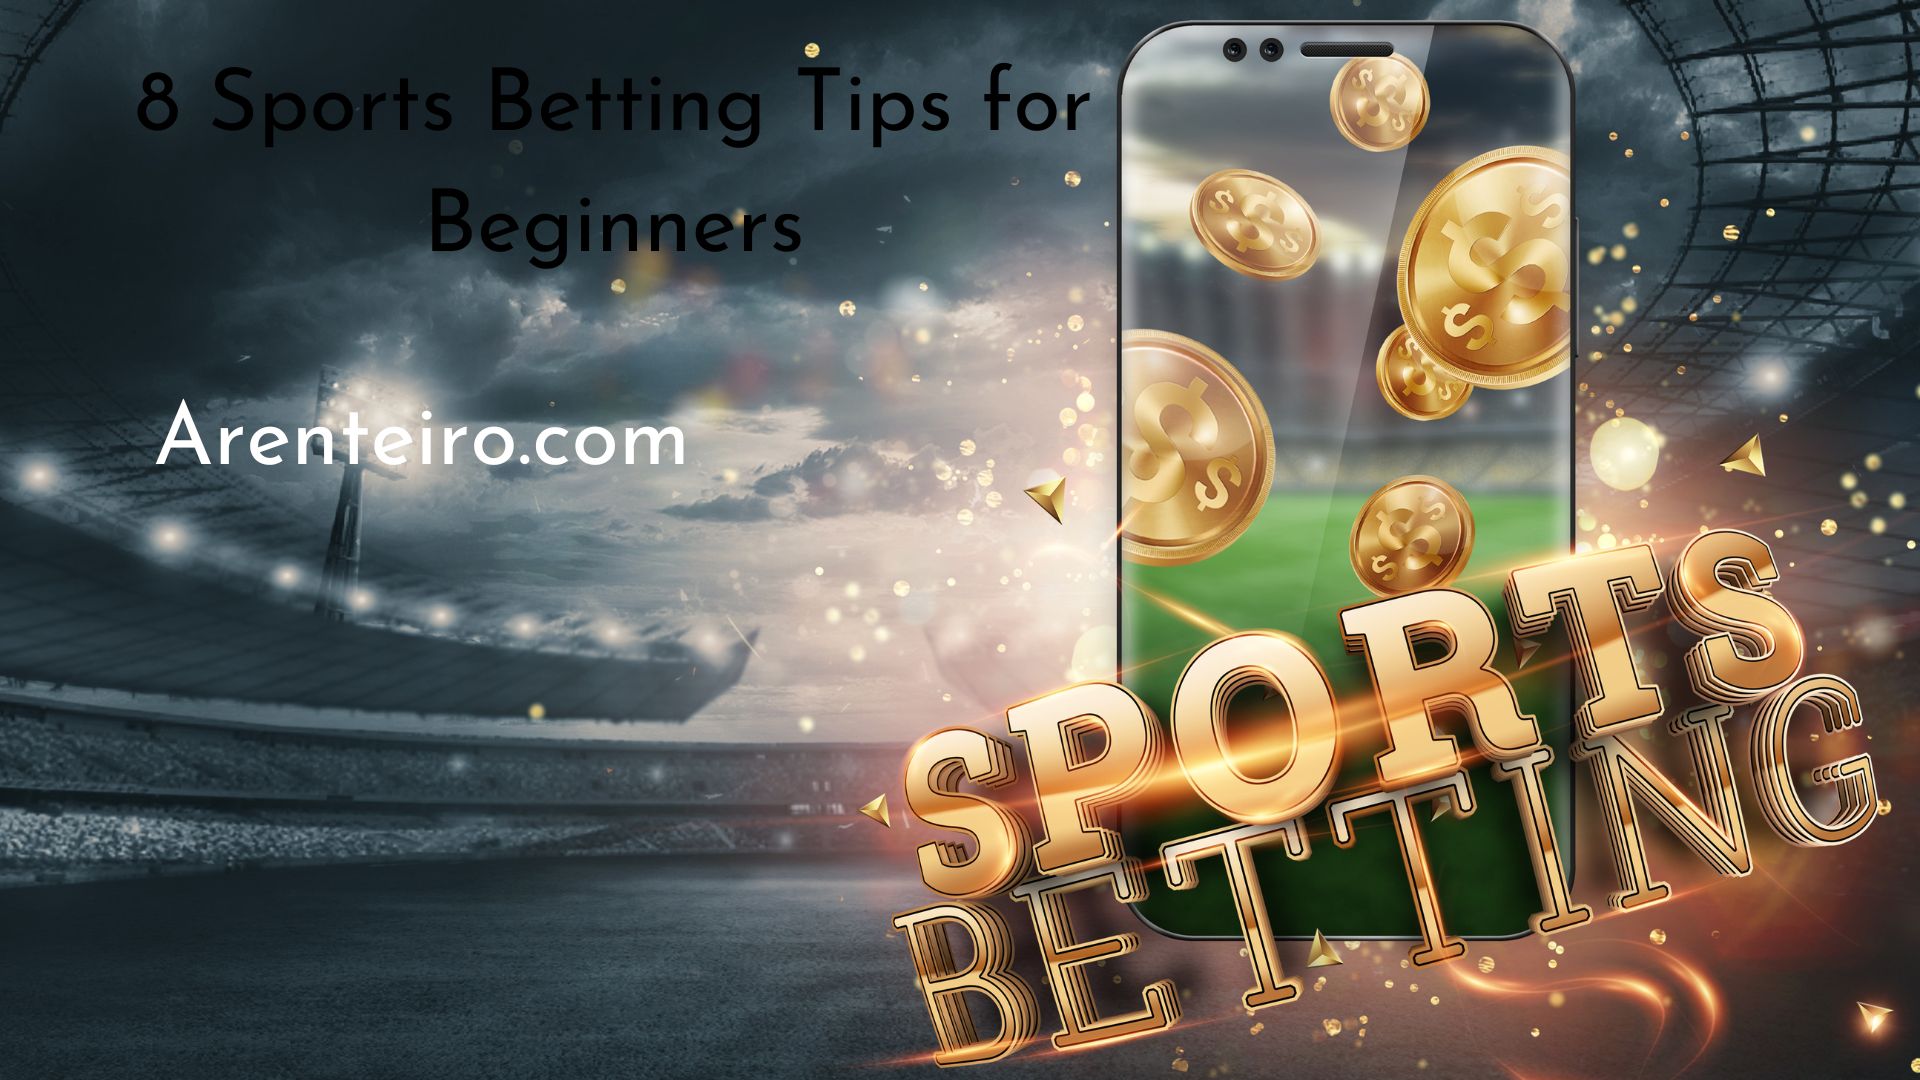 8 Sports Betting Tips for Beginners